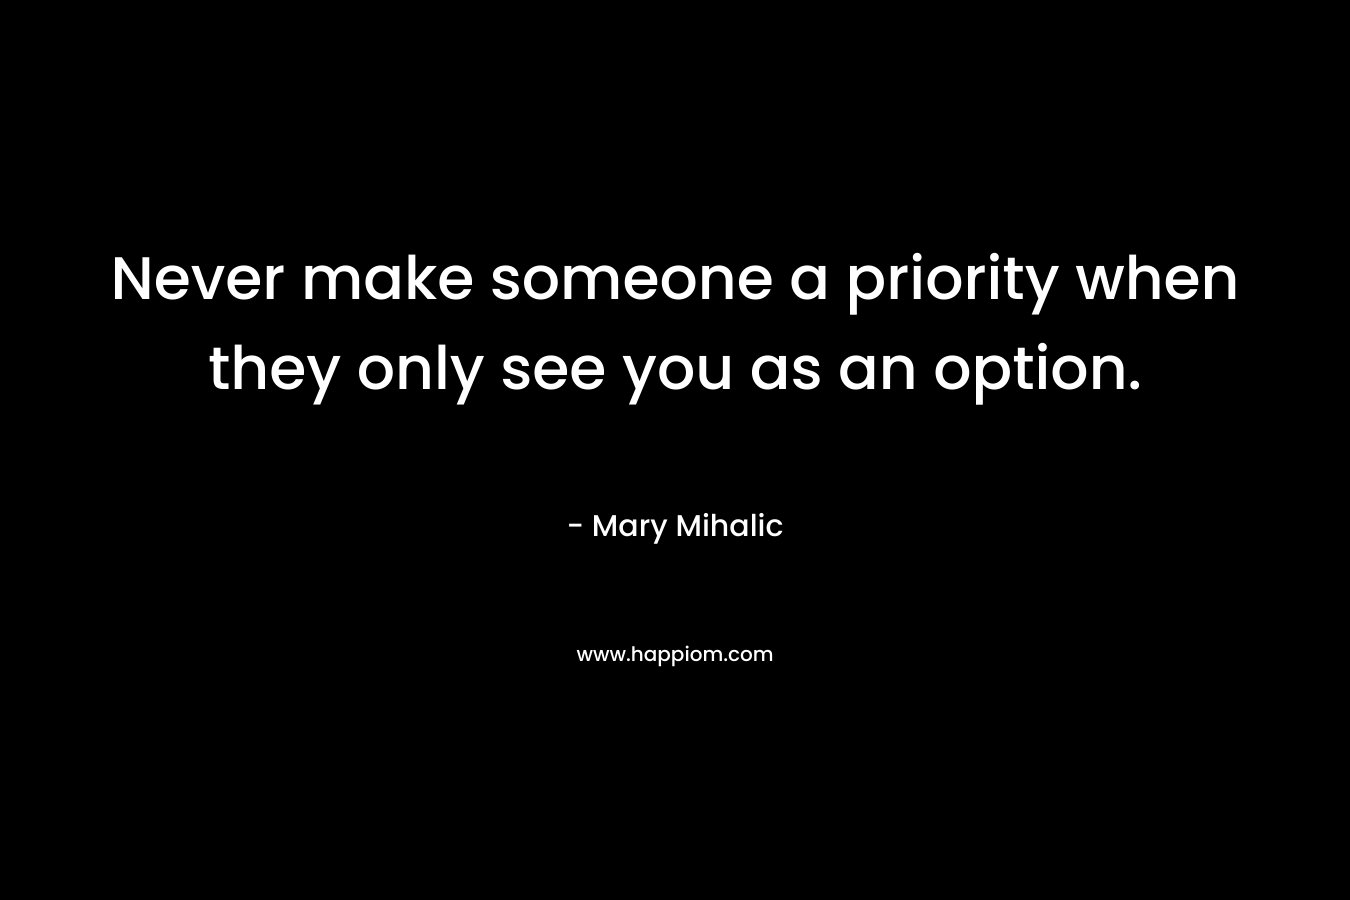 Never make someone a priority when they only see you as an option.